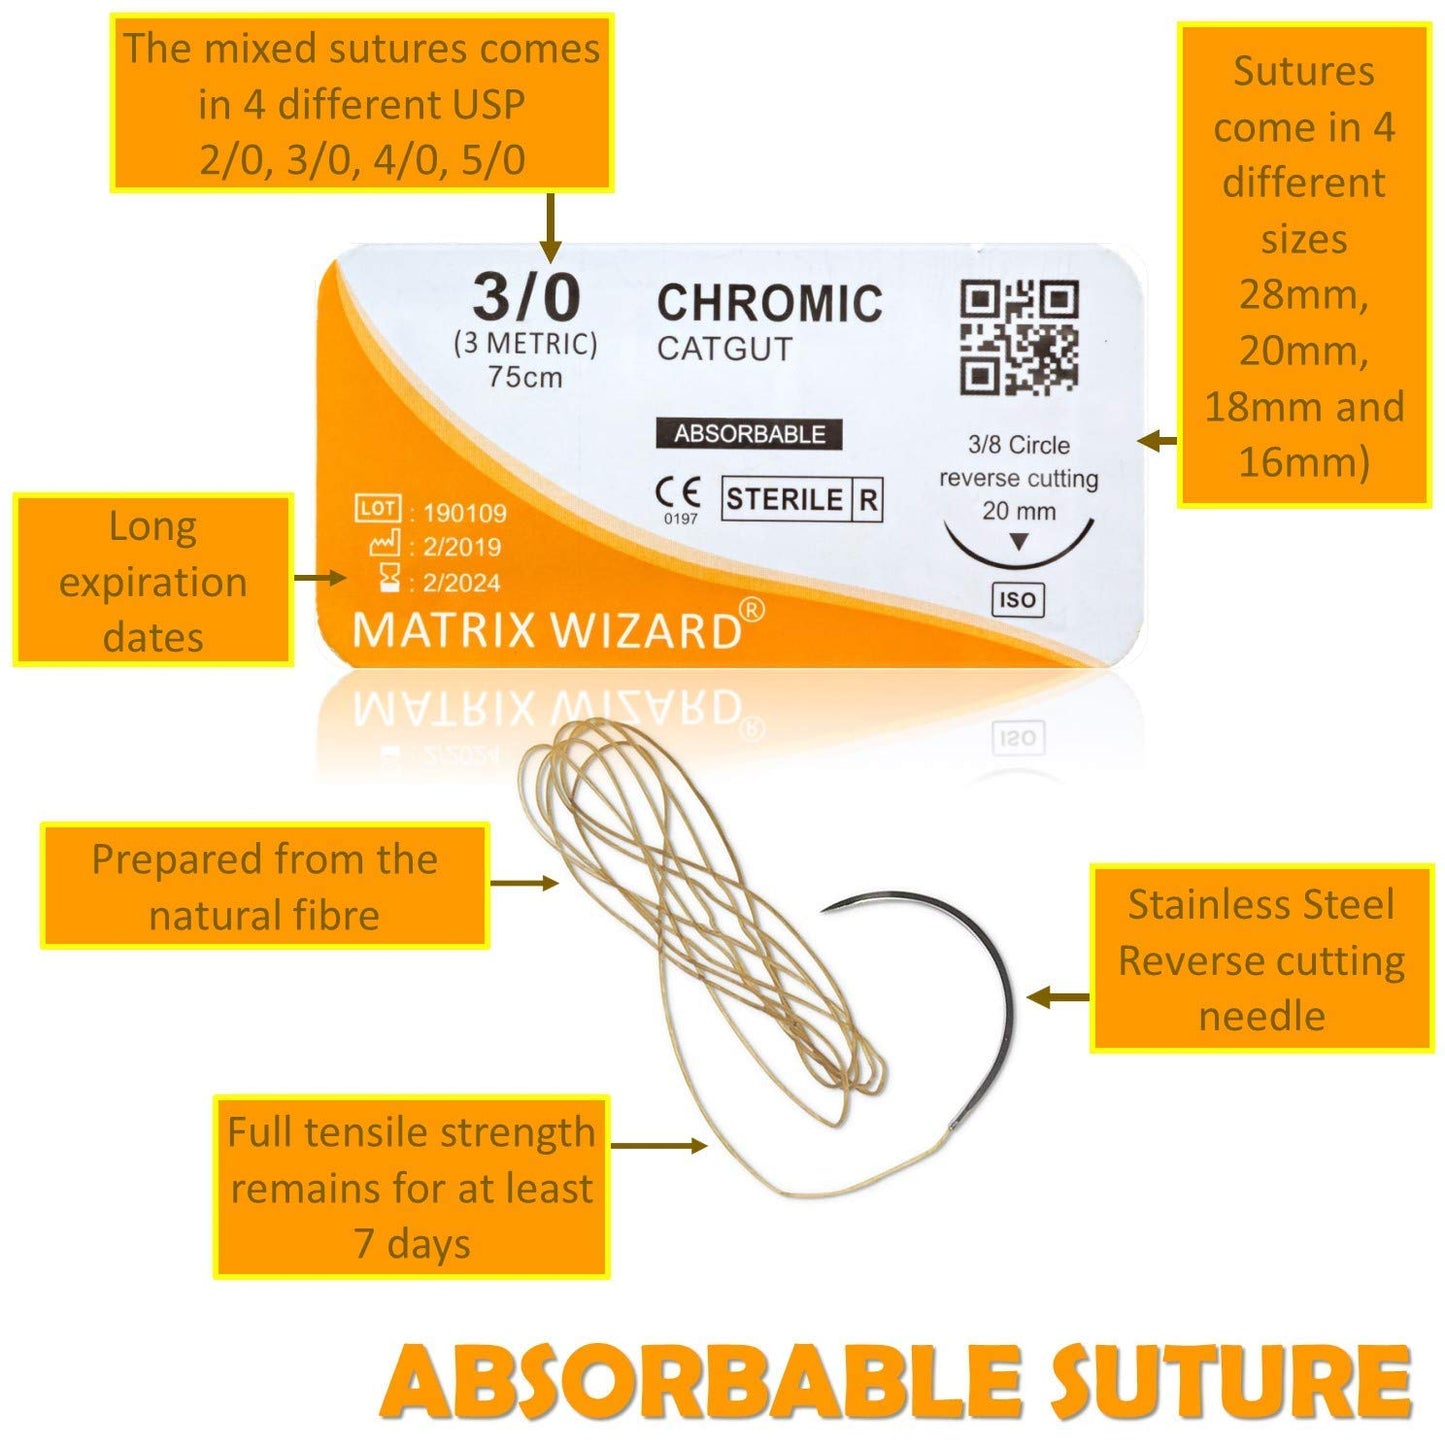 Mixed Sutures Thread with Needle (Absorbable: Chromic Catgut; Non-Absorbable: Nylon, Silk, Polyester, Polypropylene) - Surgical Wound Practice Kit, Taxidermy, Suture Pad Training (2-0, 3-0, 4-0, 5-0) 24PK